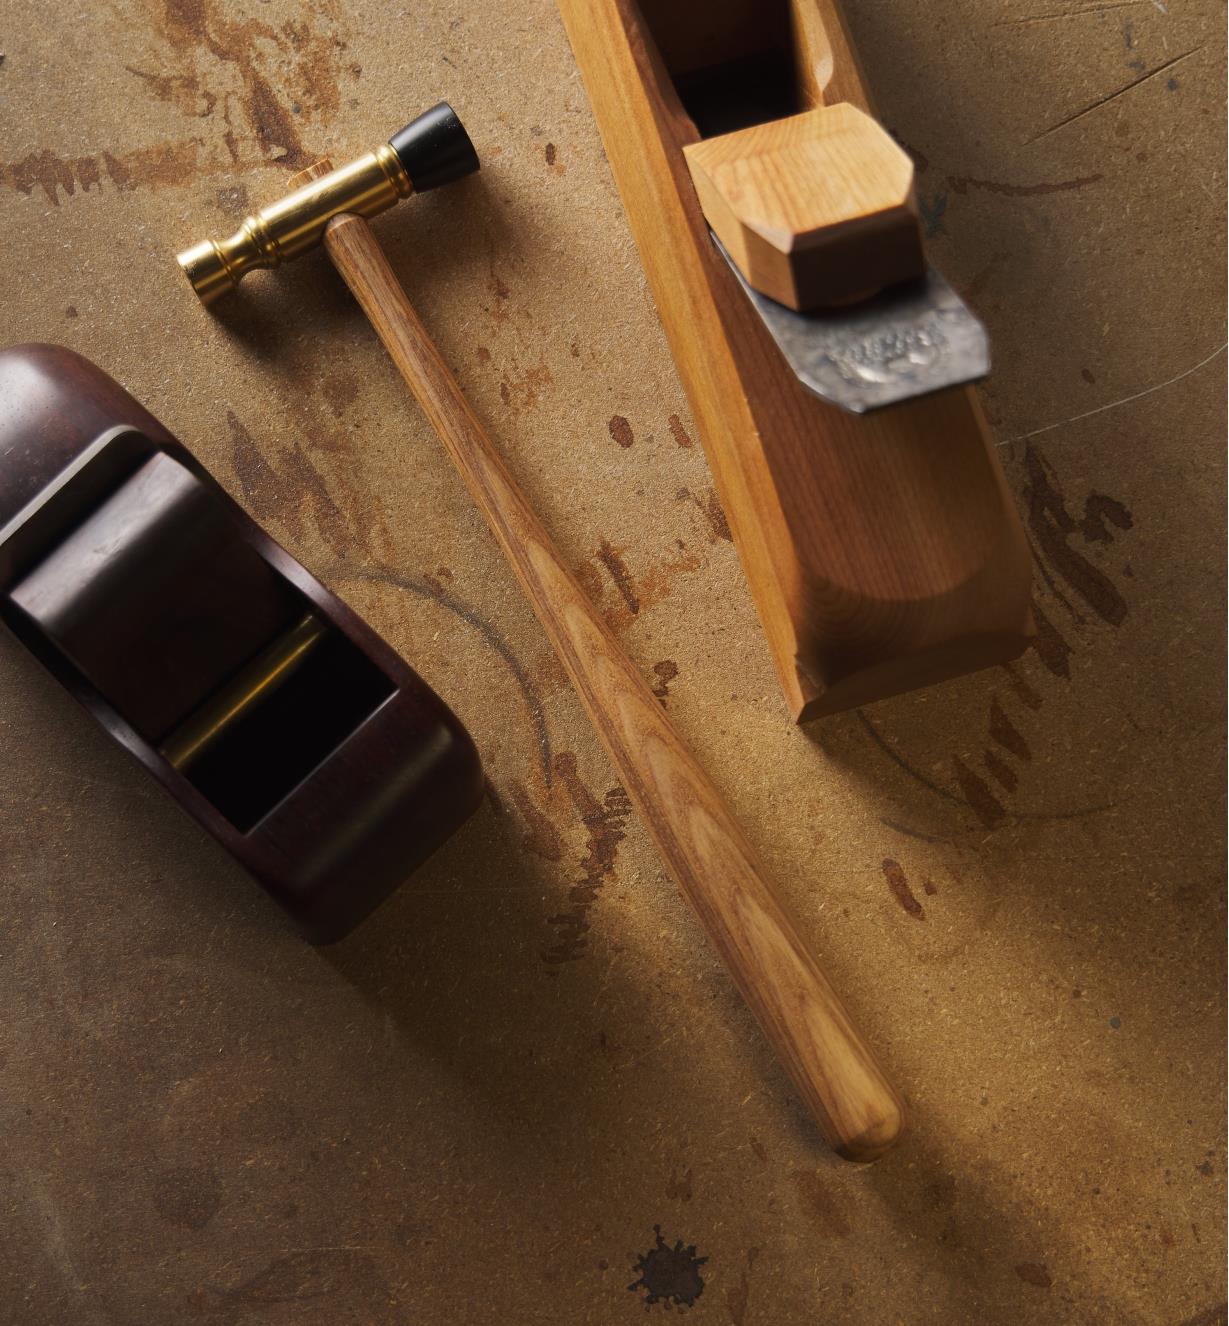 The Wile plane hammer and wooden planes on a work surface